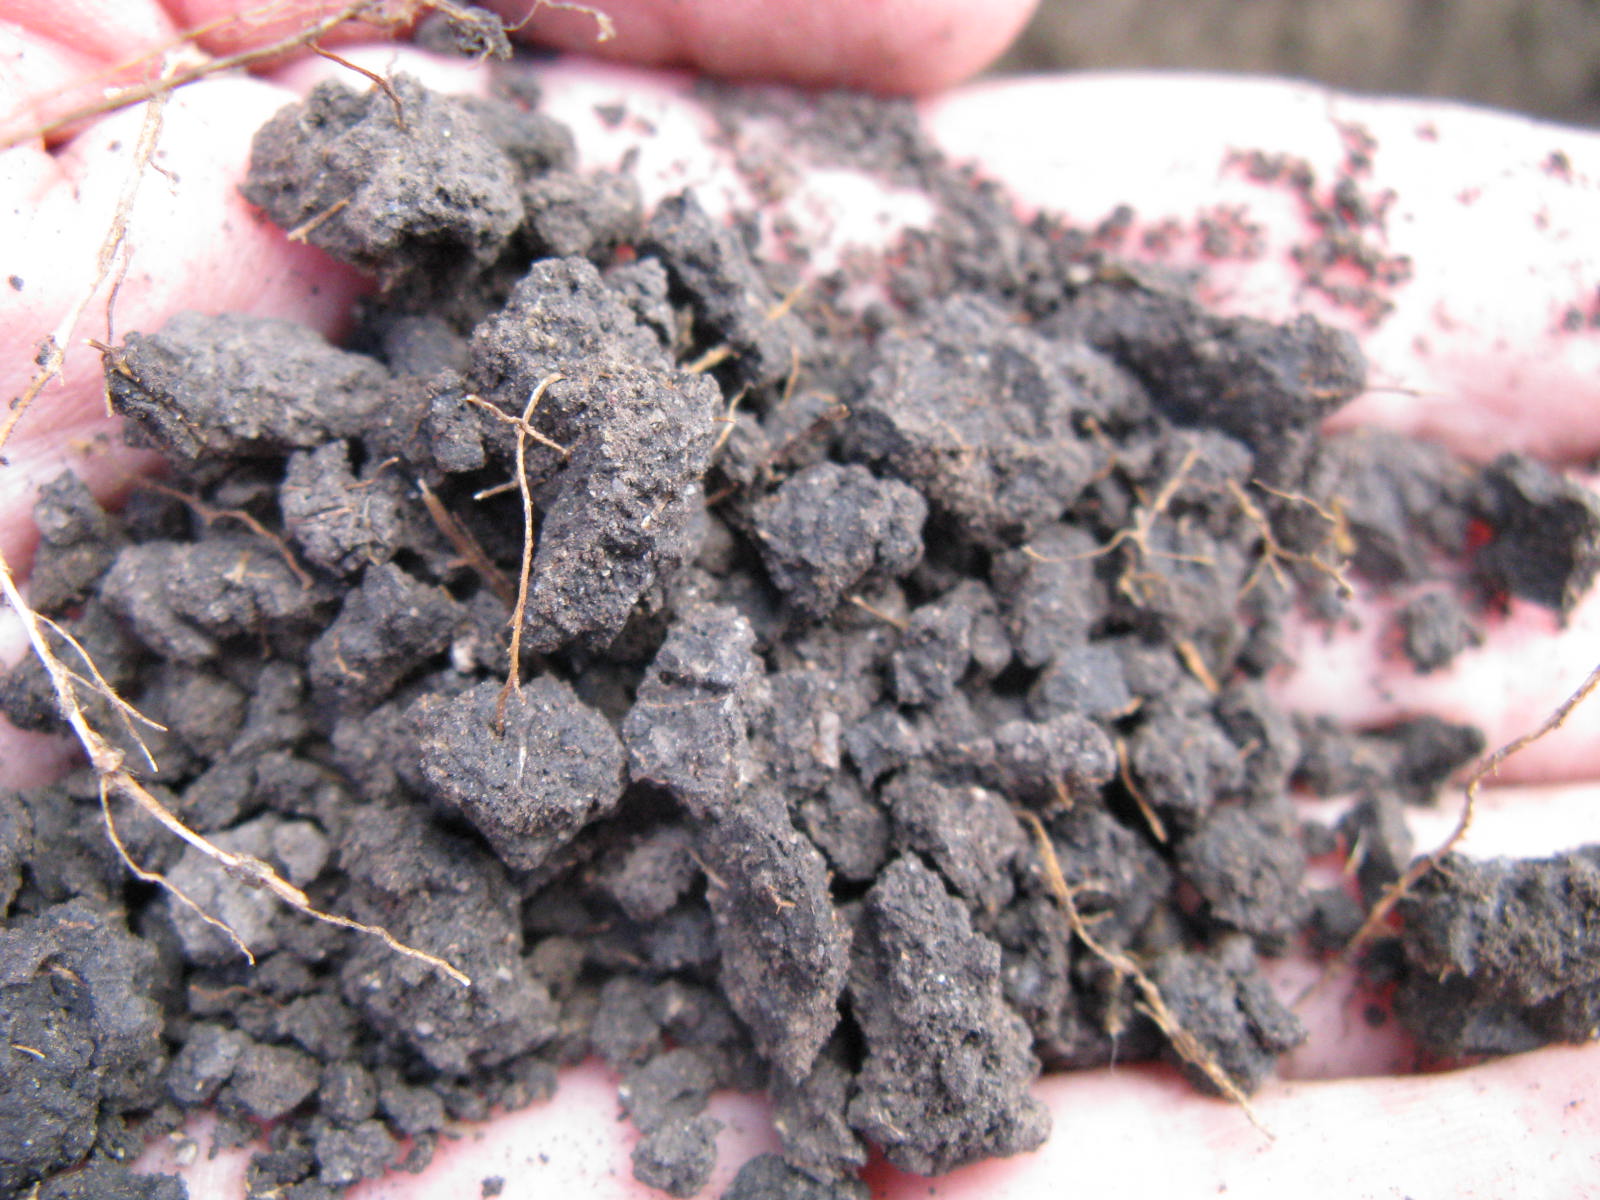 crumbly soil with visible root pieces on a hand.